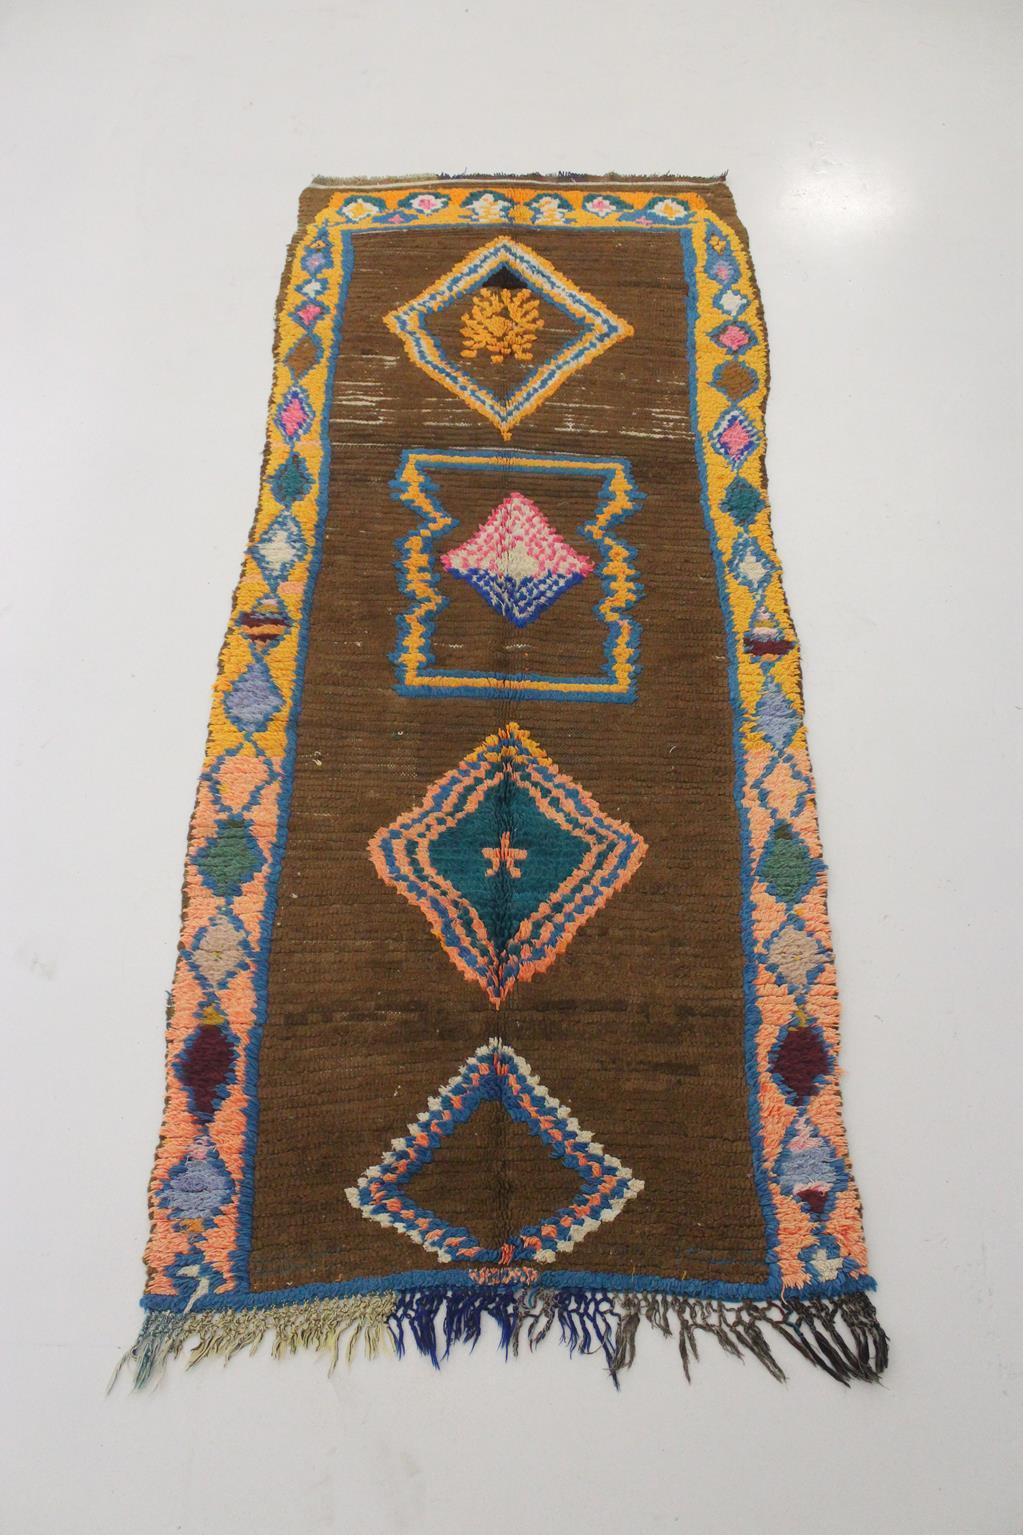 Vintage Moroccan Boujad runner rug - Brown/pink/blue - 3.2x7.5feet / 97x228cm In Good Condition For Sale In Marrakech, MA